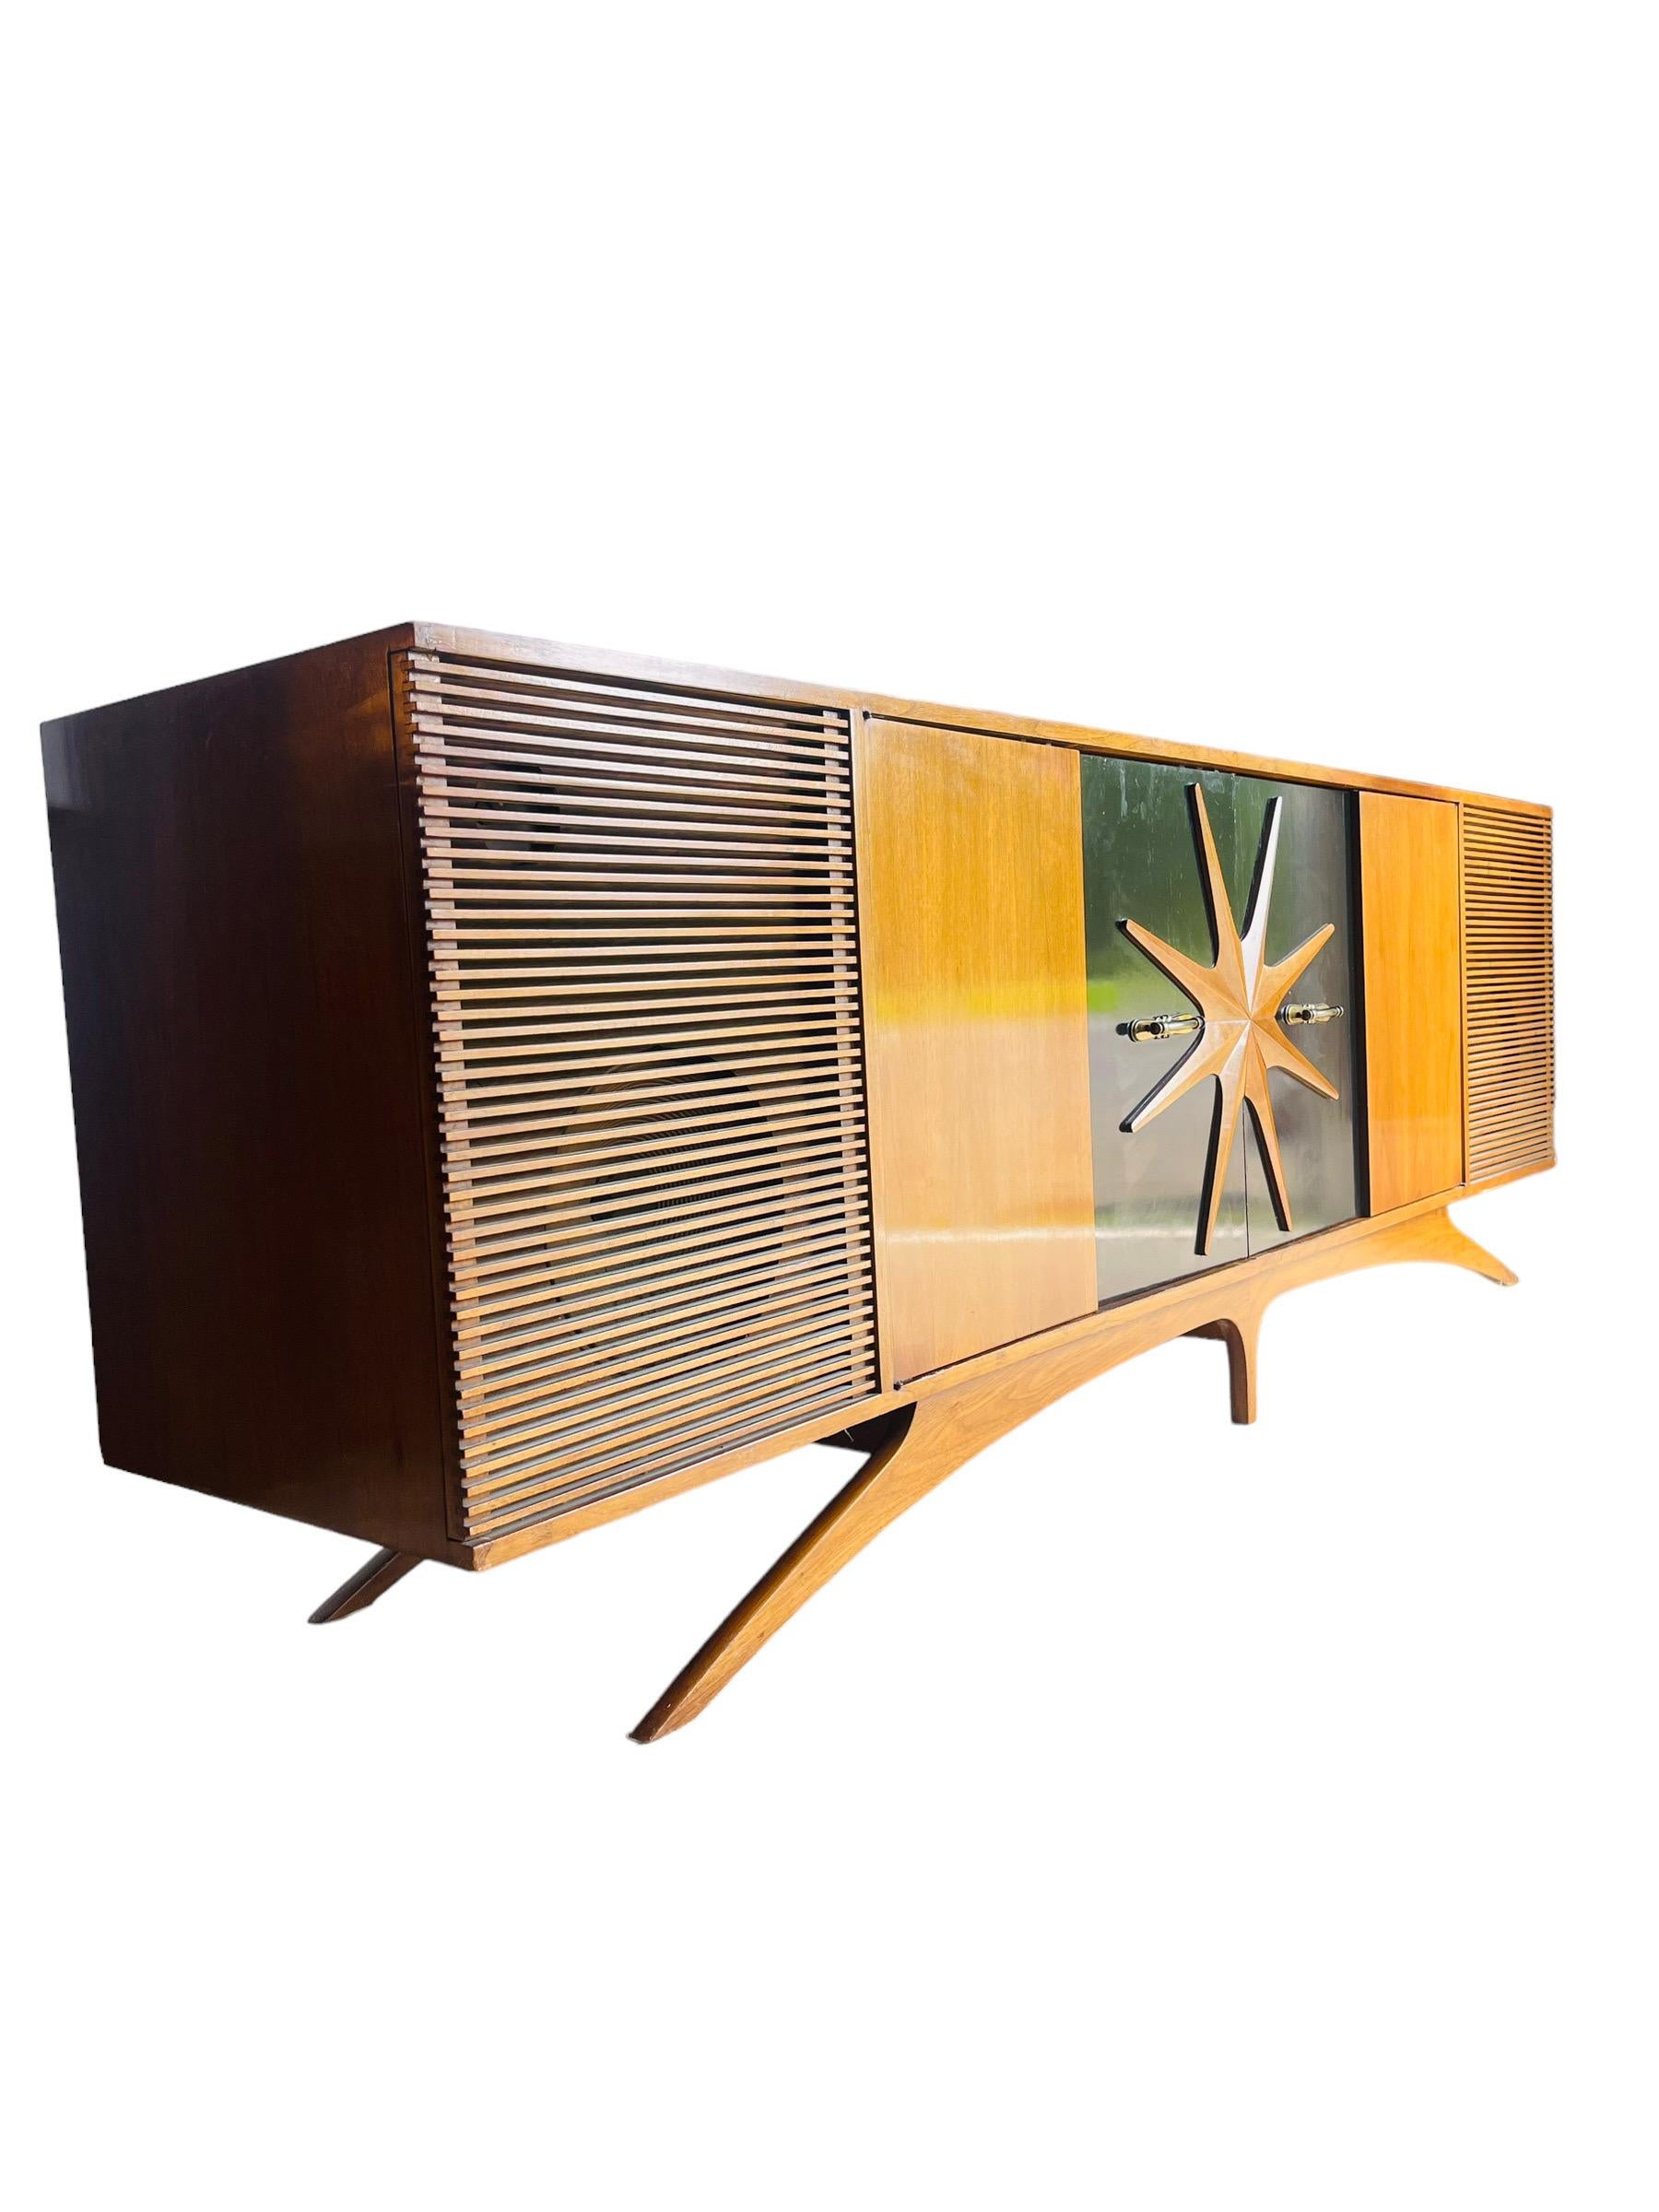 Rare Sculptural Credenza / Stereo Cabinet in Walnut in Manner of Vladimir Kagan For Sale 2